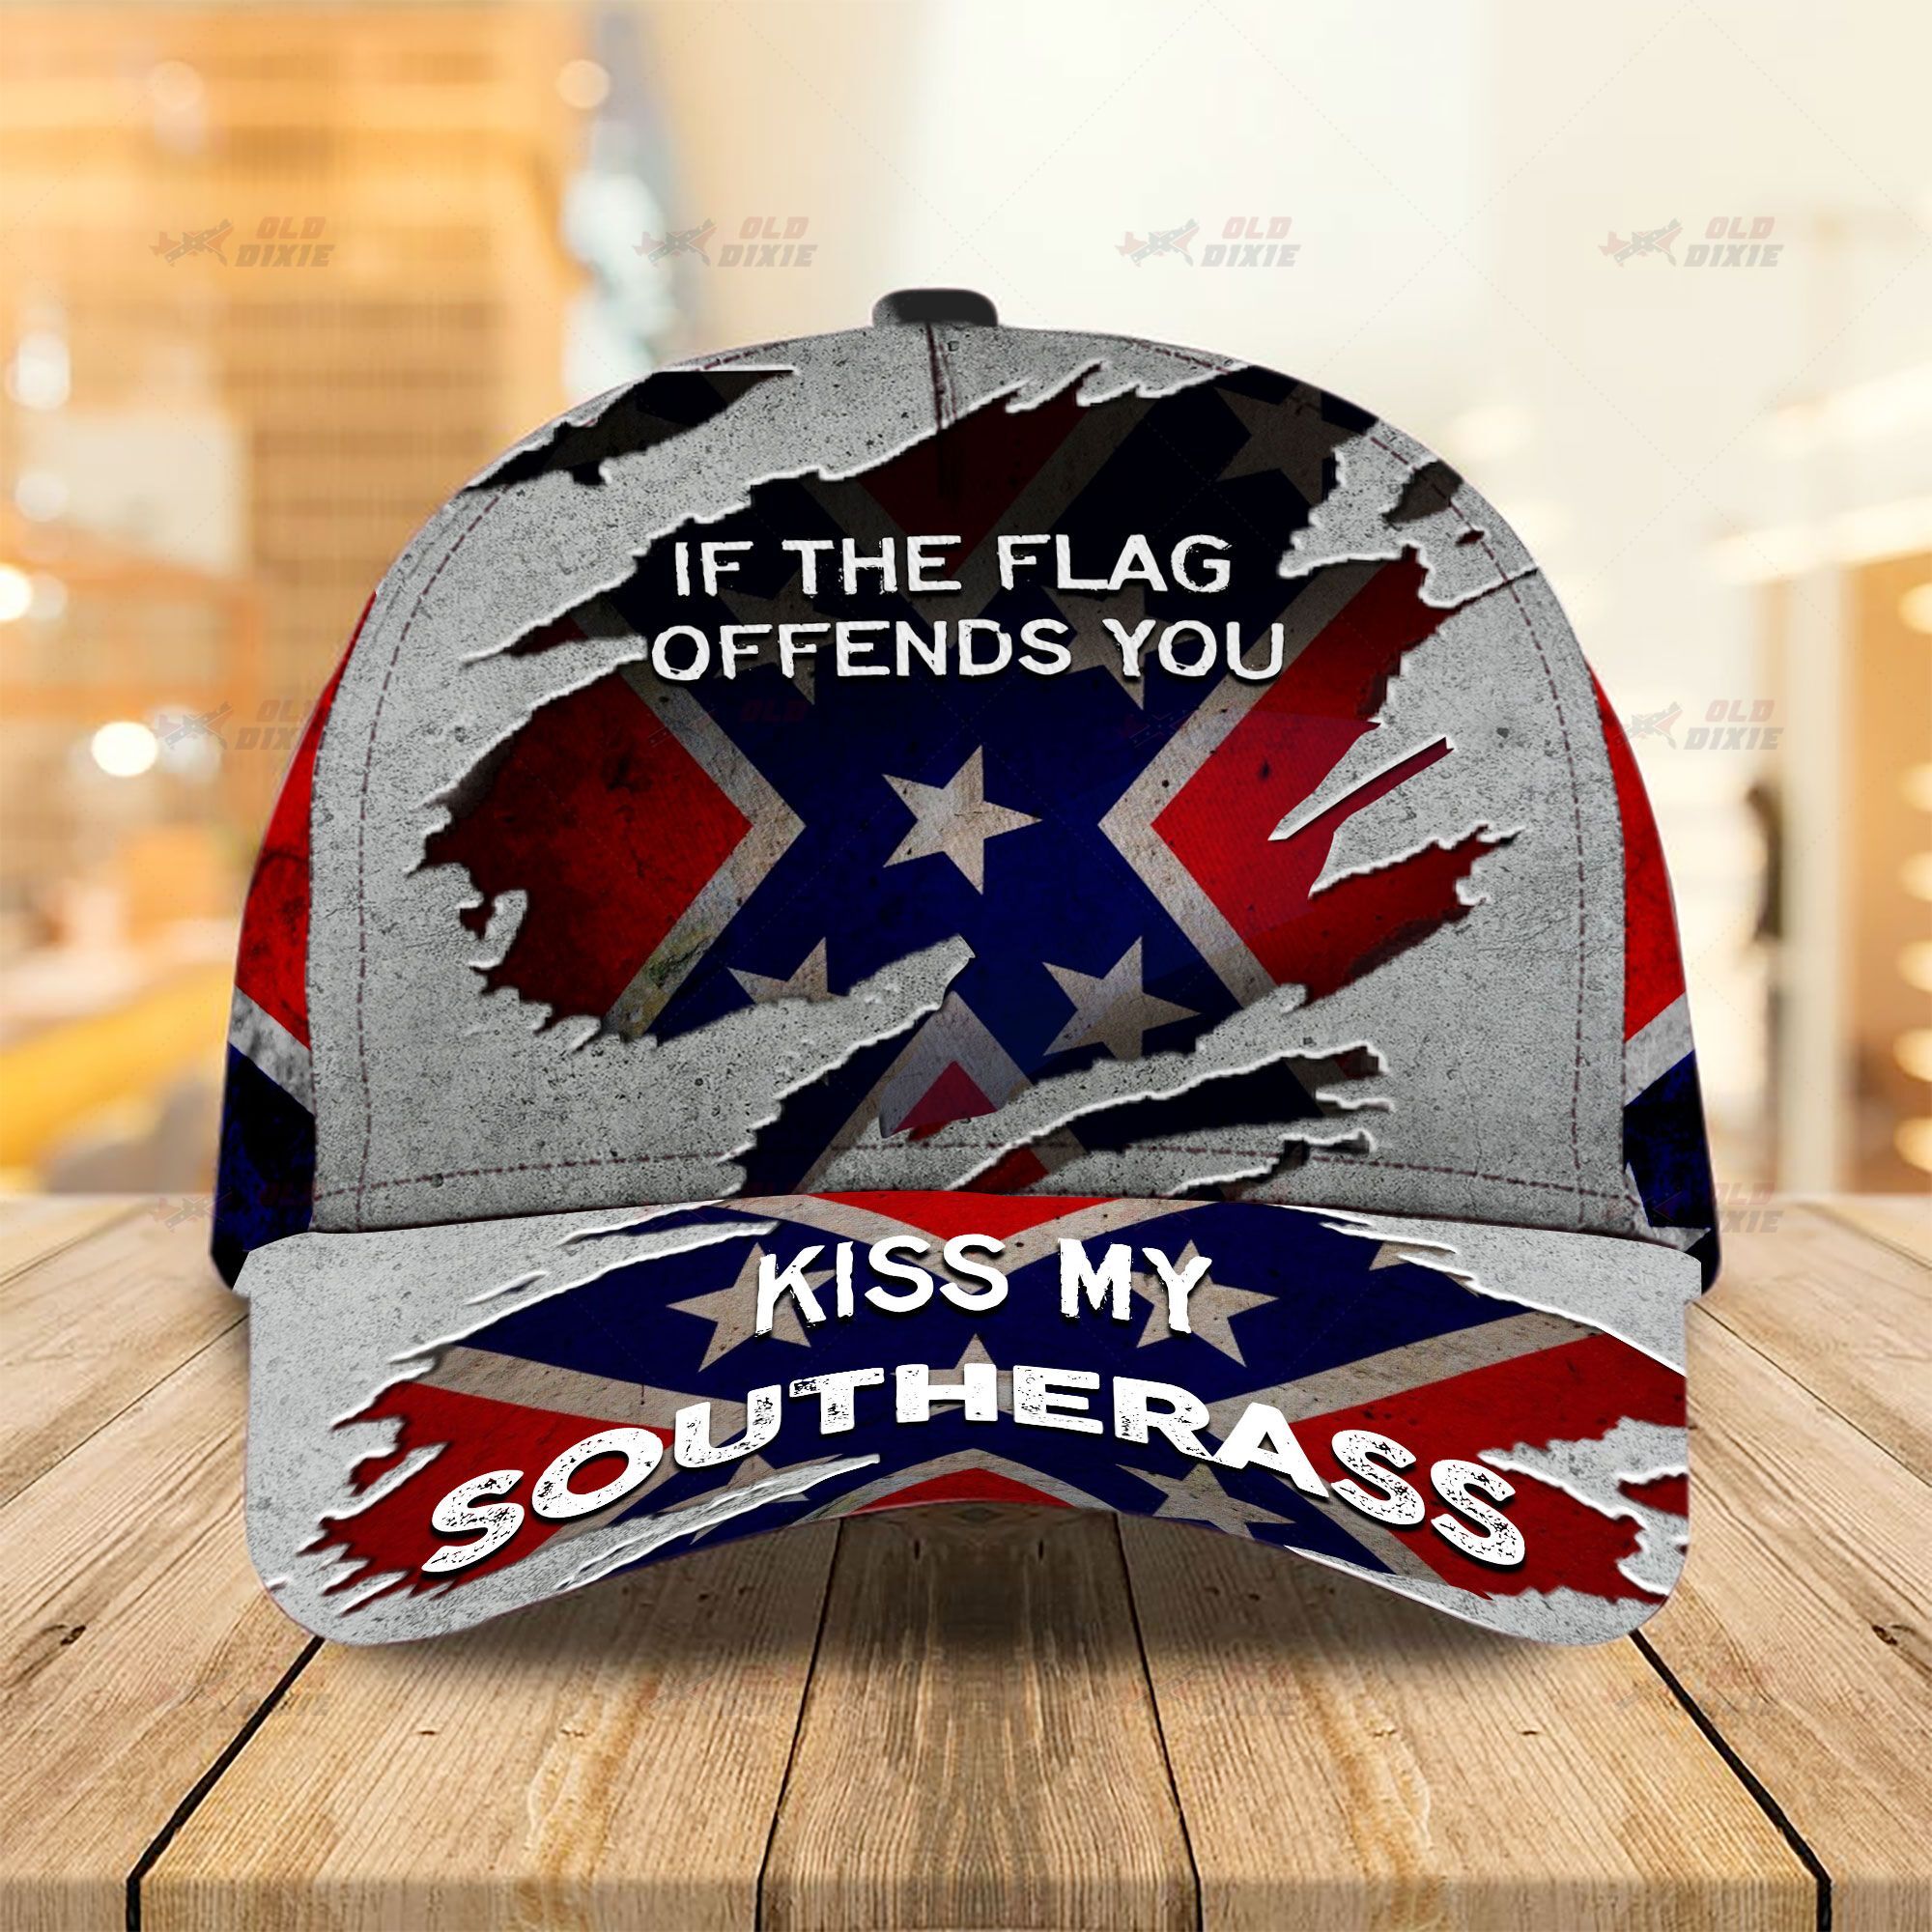 If the flag offends you kiss my southern southerass cap